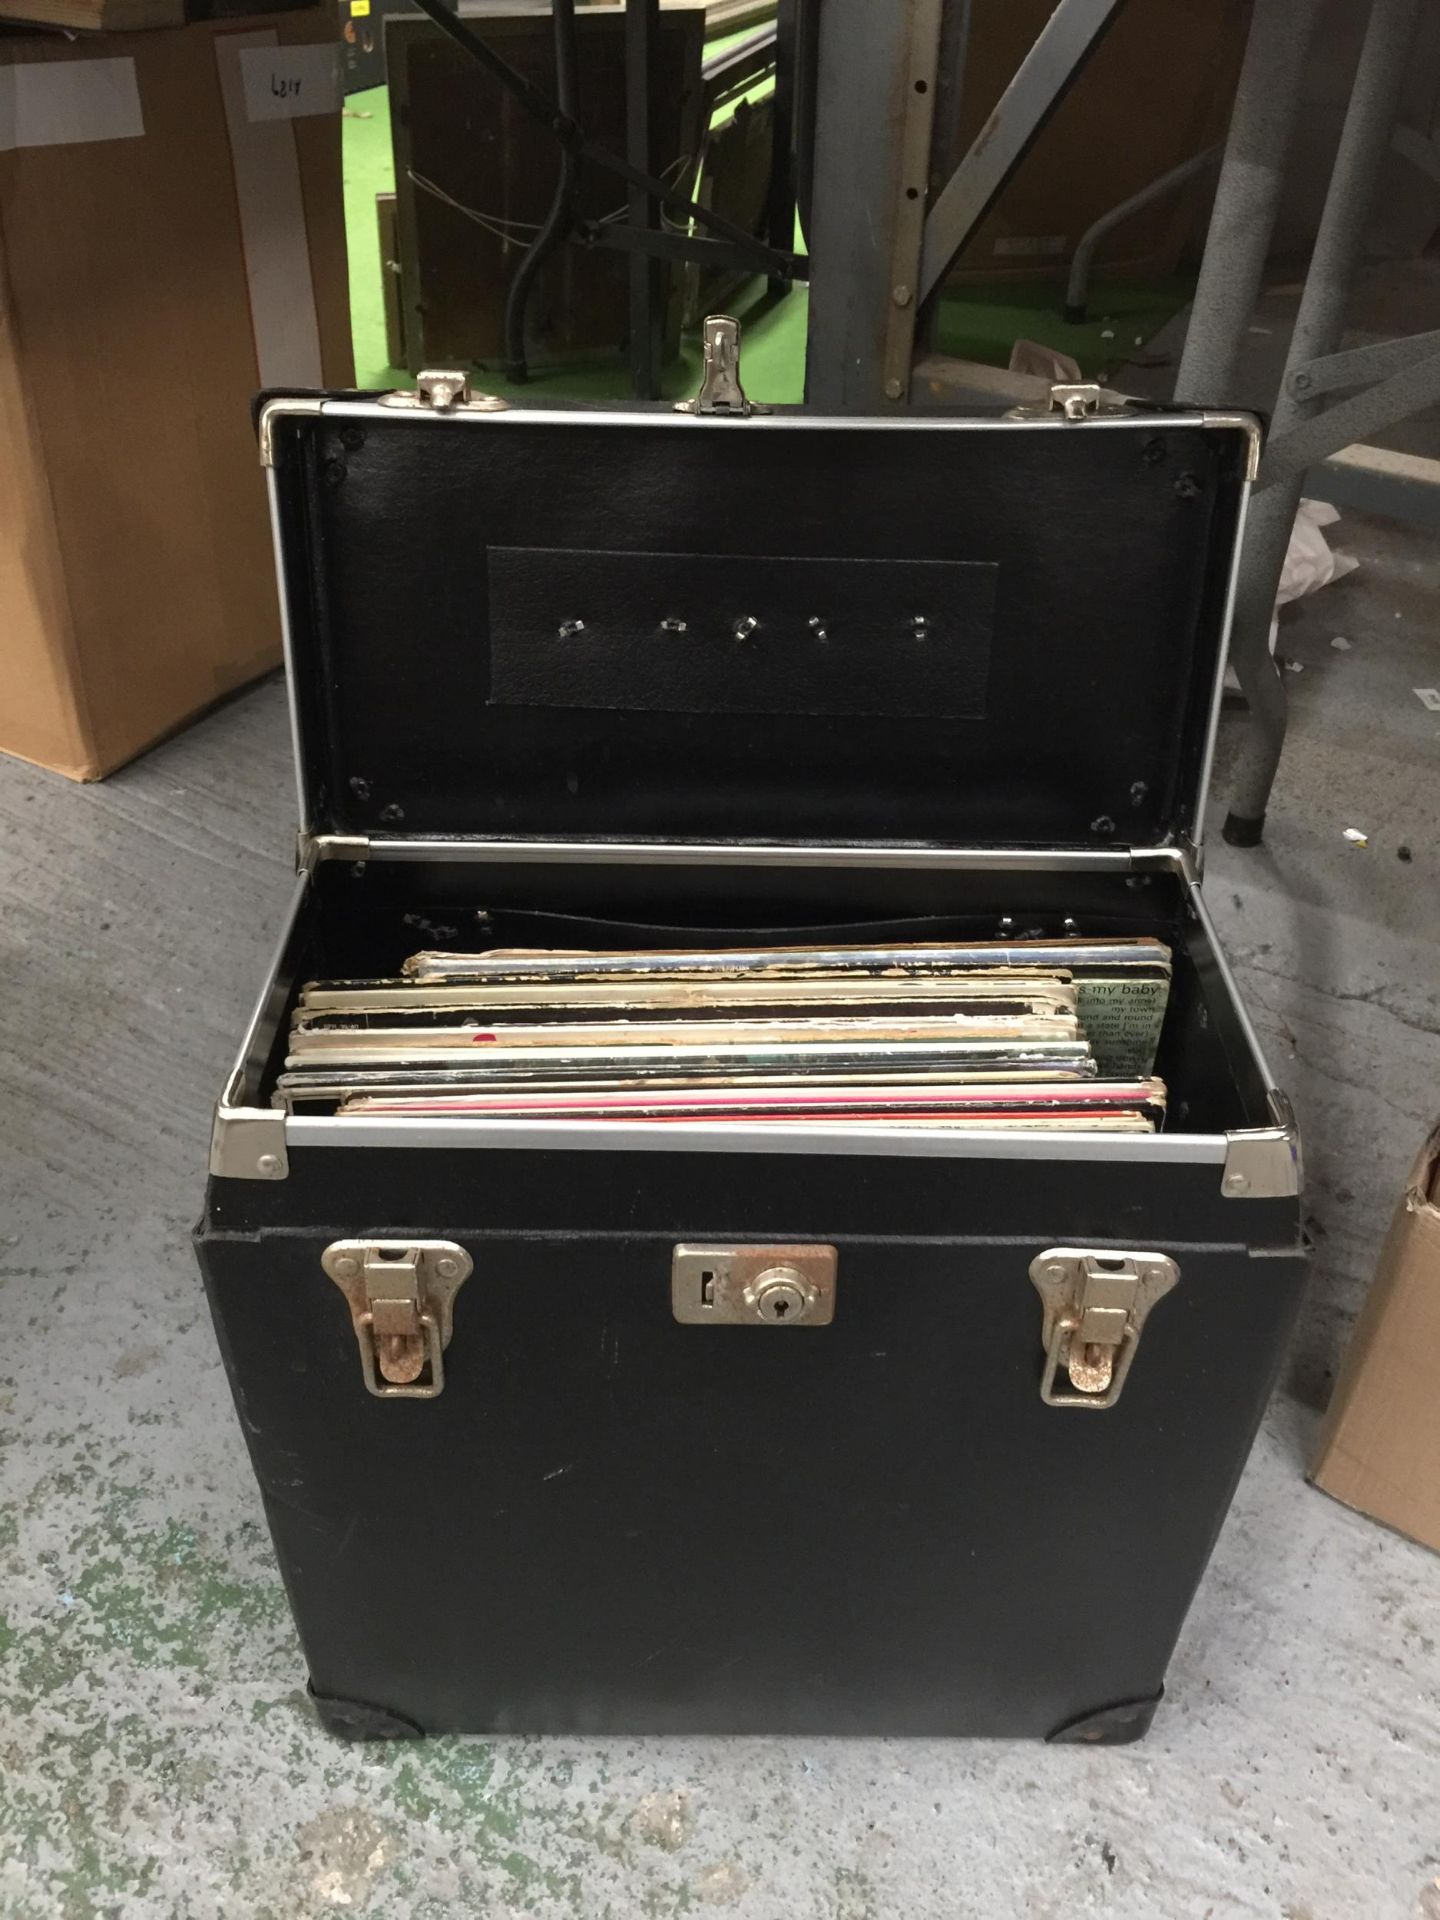 A COLLECTION OF LP RECORDS, DAVID BOWIE, THE BEACH BOYS, IN A STORAGE CASE